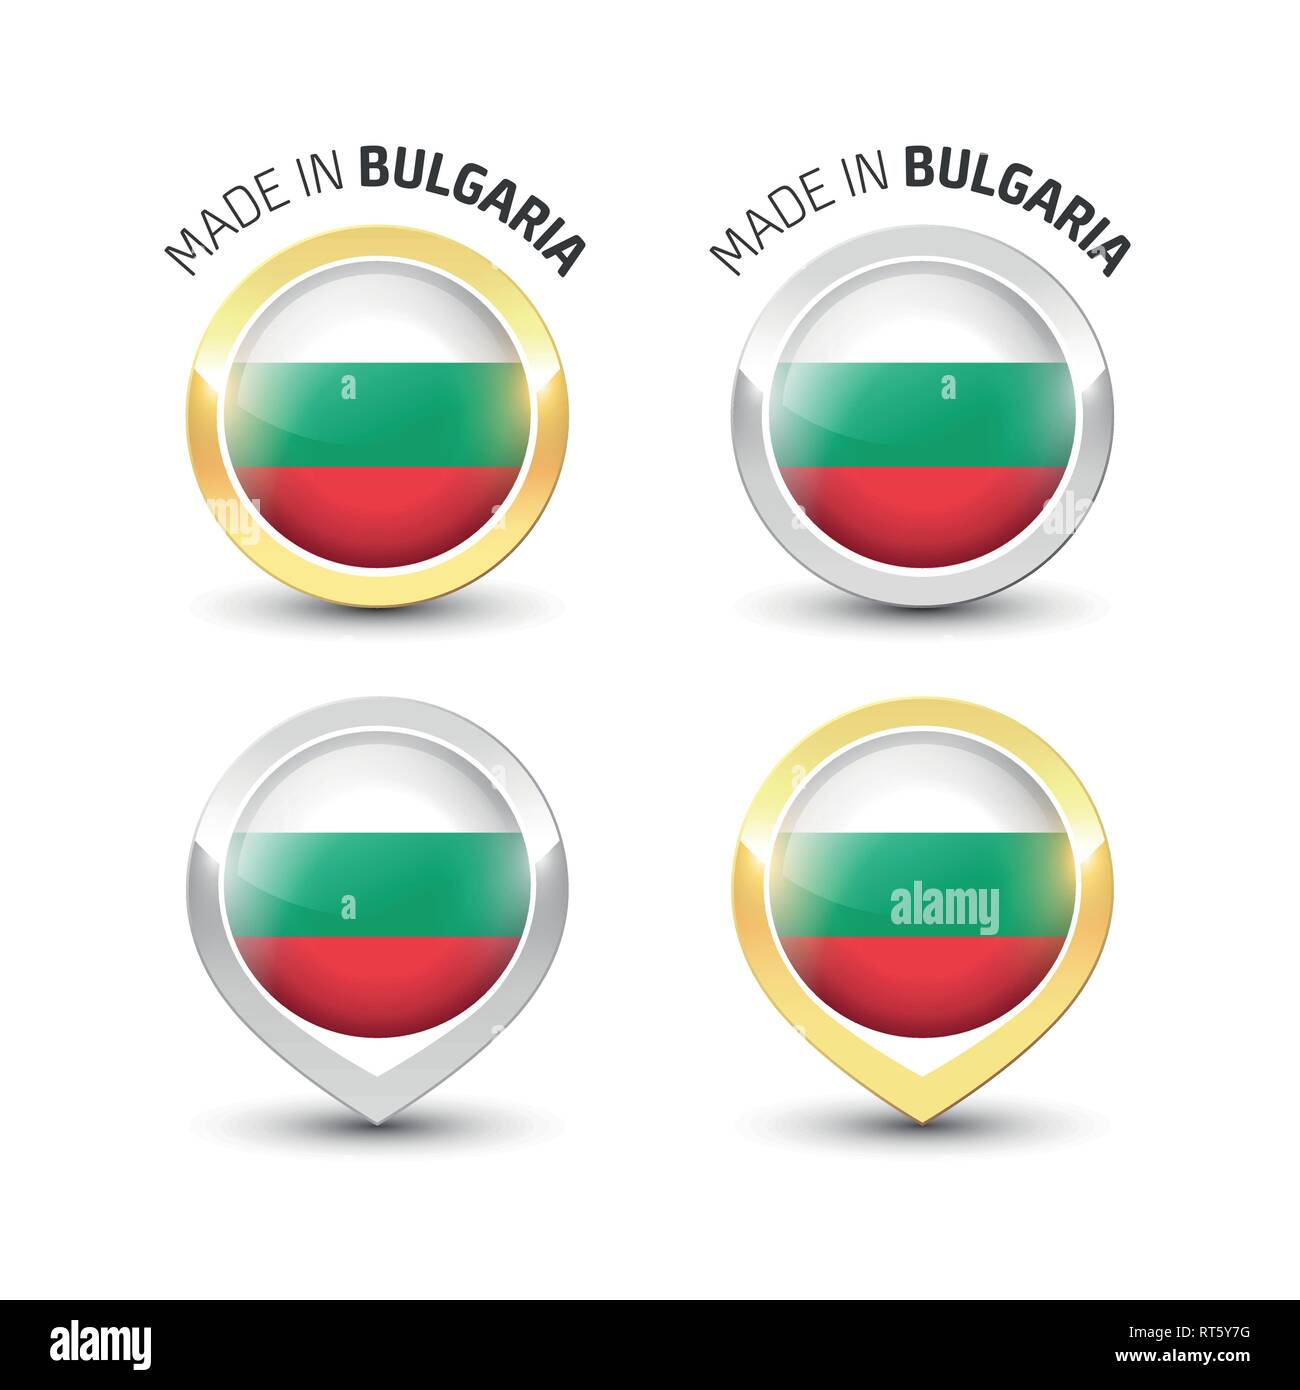 Made in Bulgaria - Guarantee label with the Bulgarian flag inside round gold and silver icons. Stock Vector